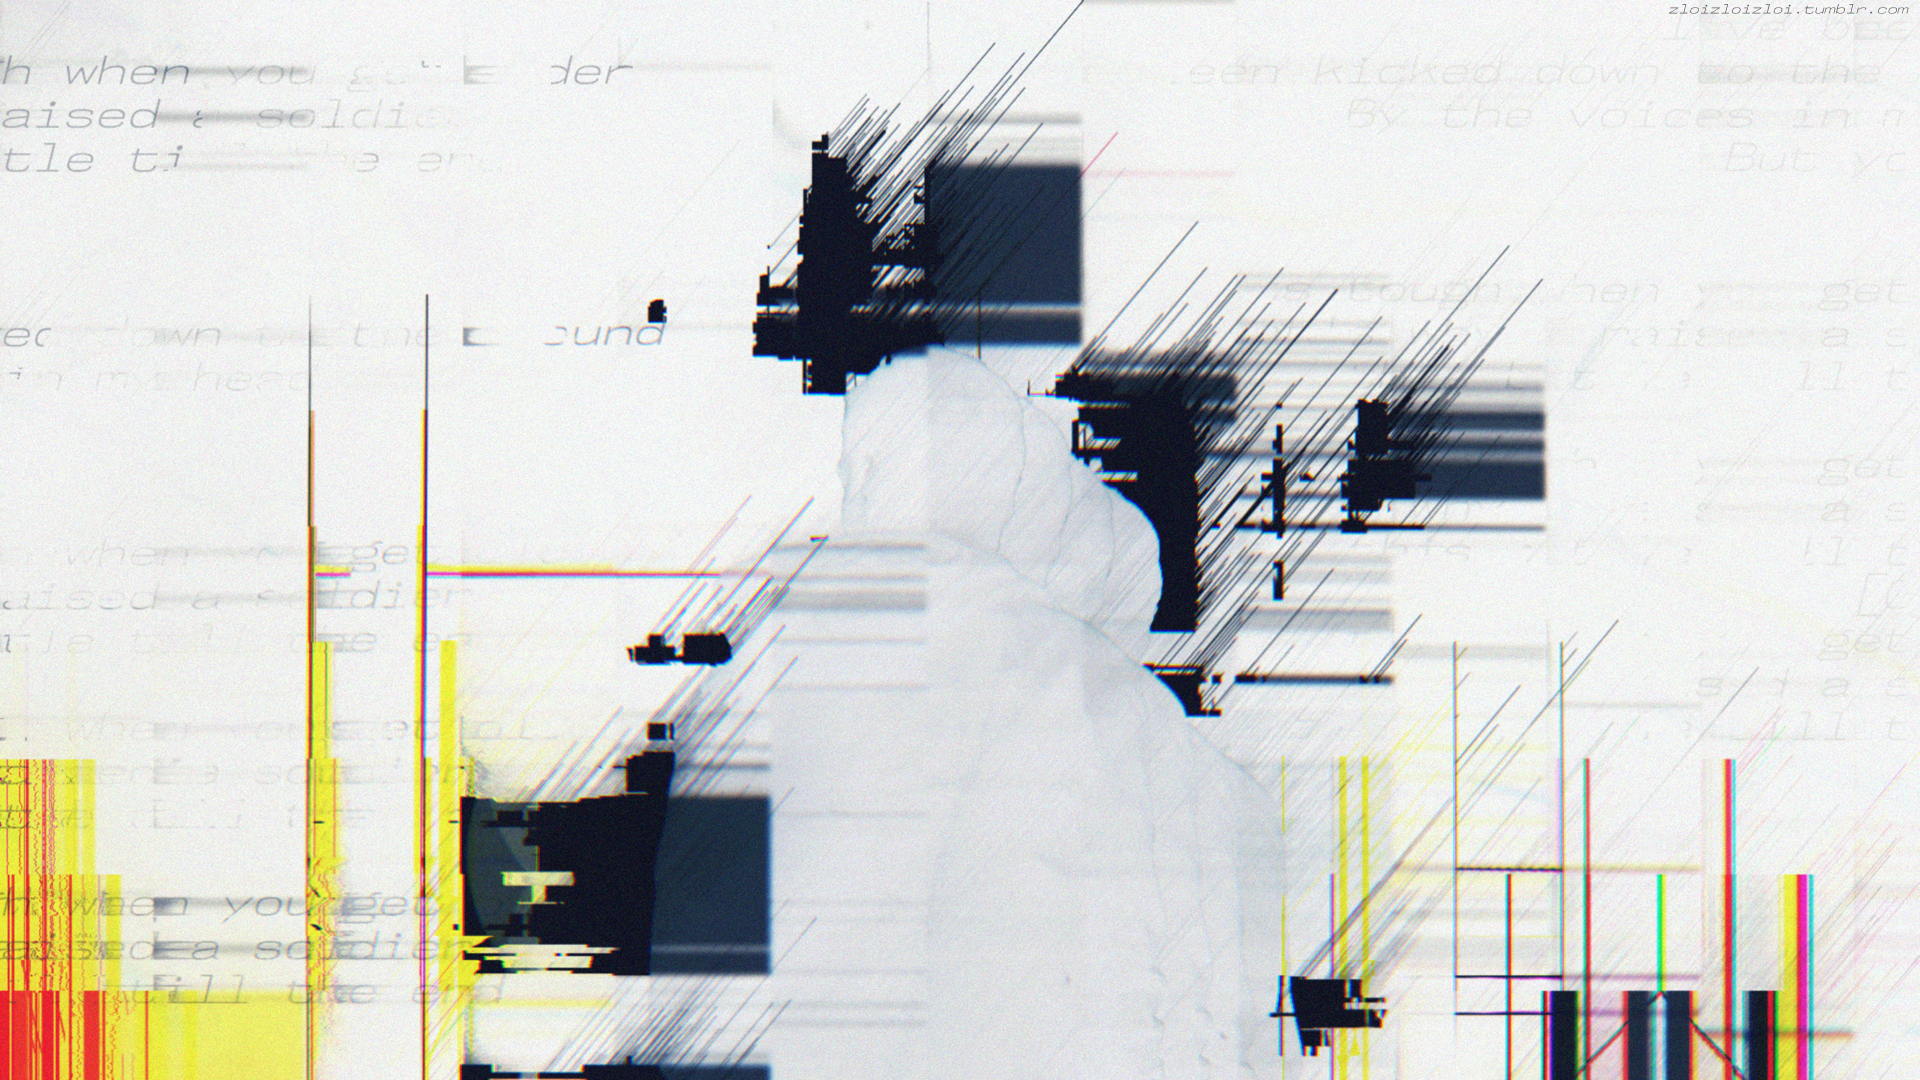 General 1920x1080 glitch art abstract white